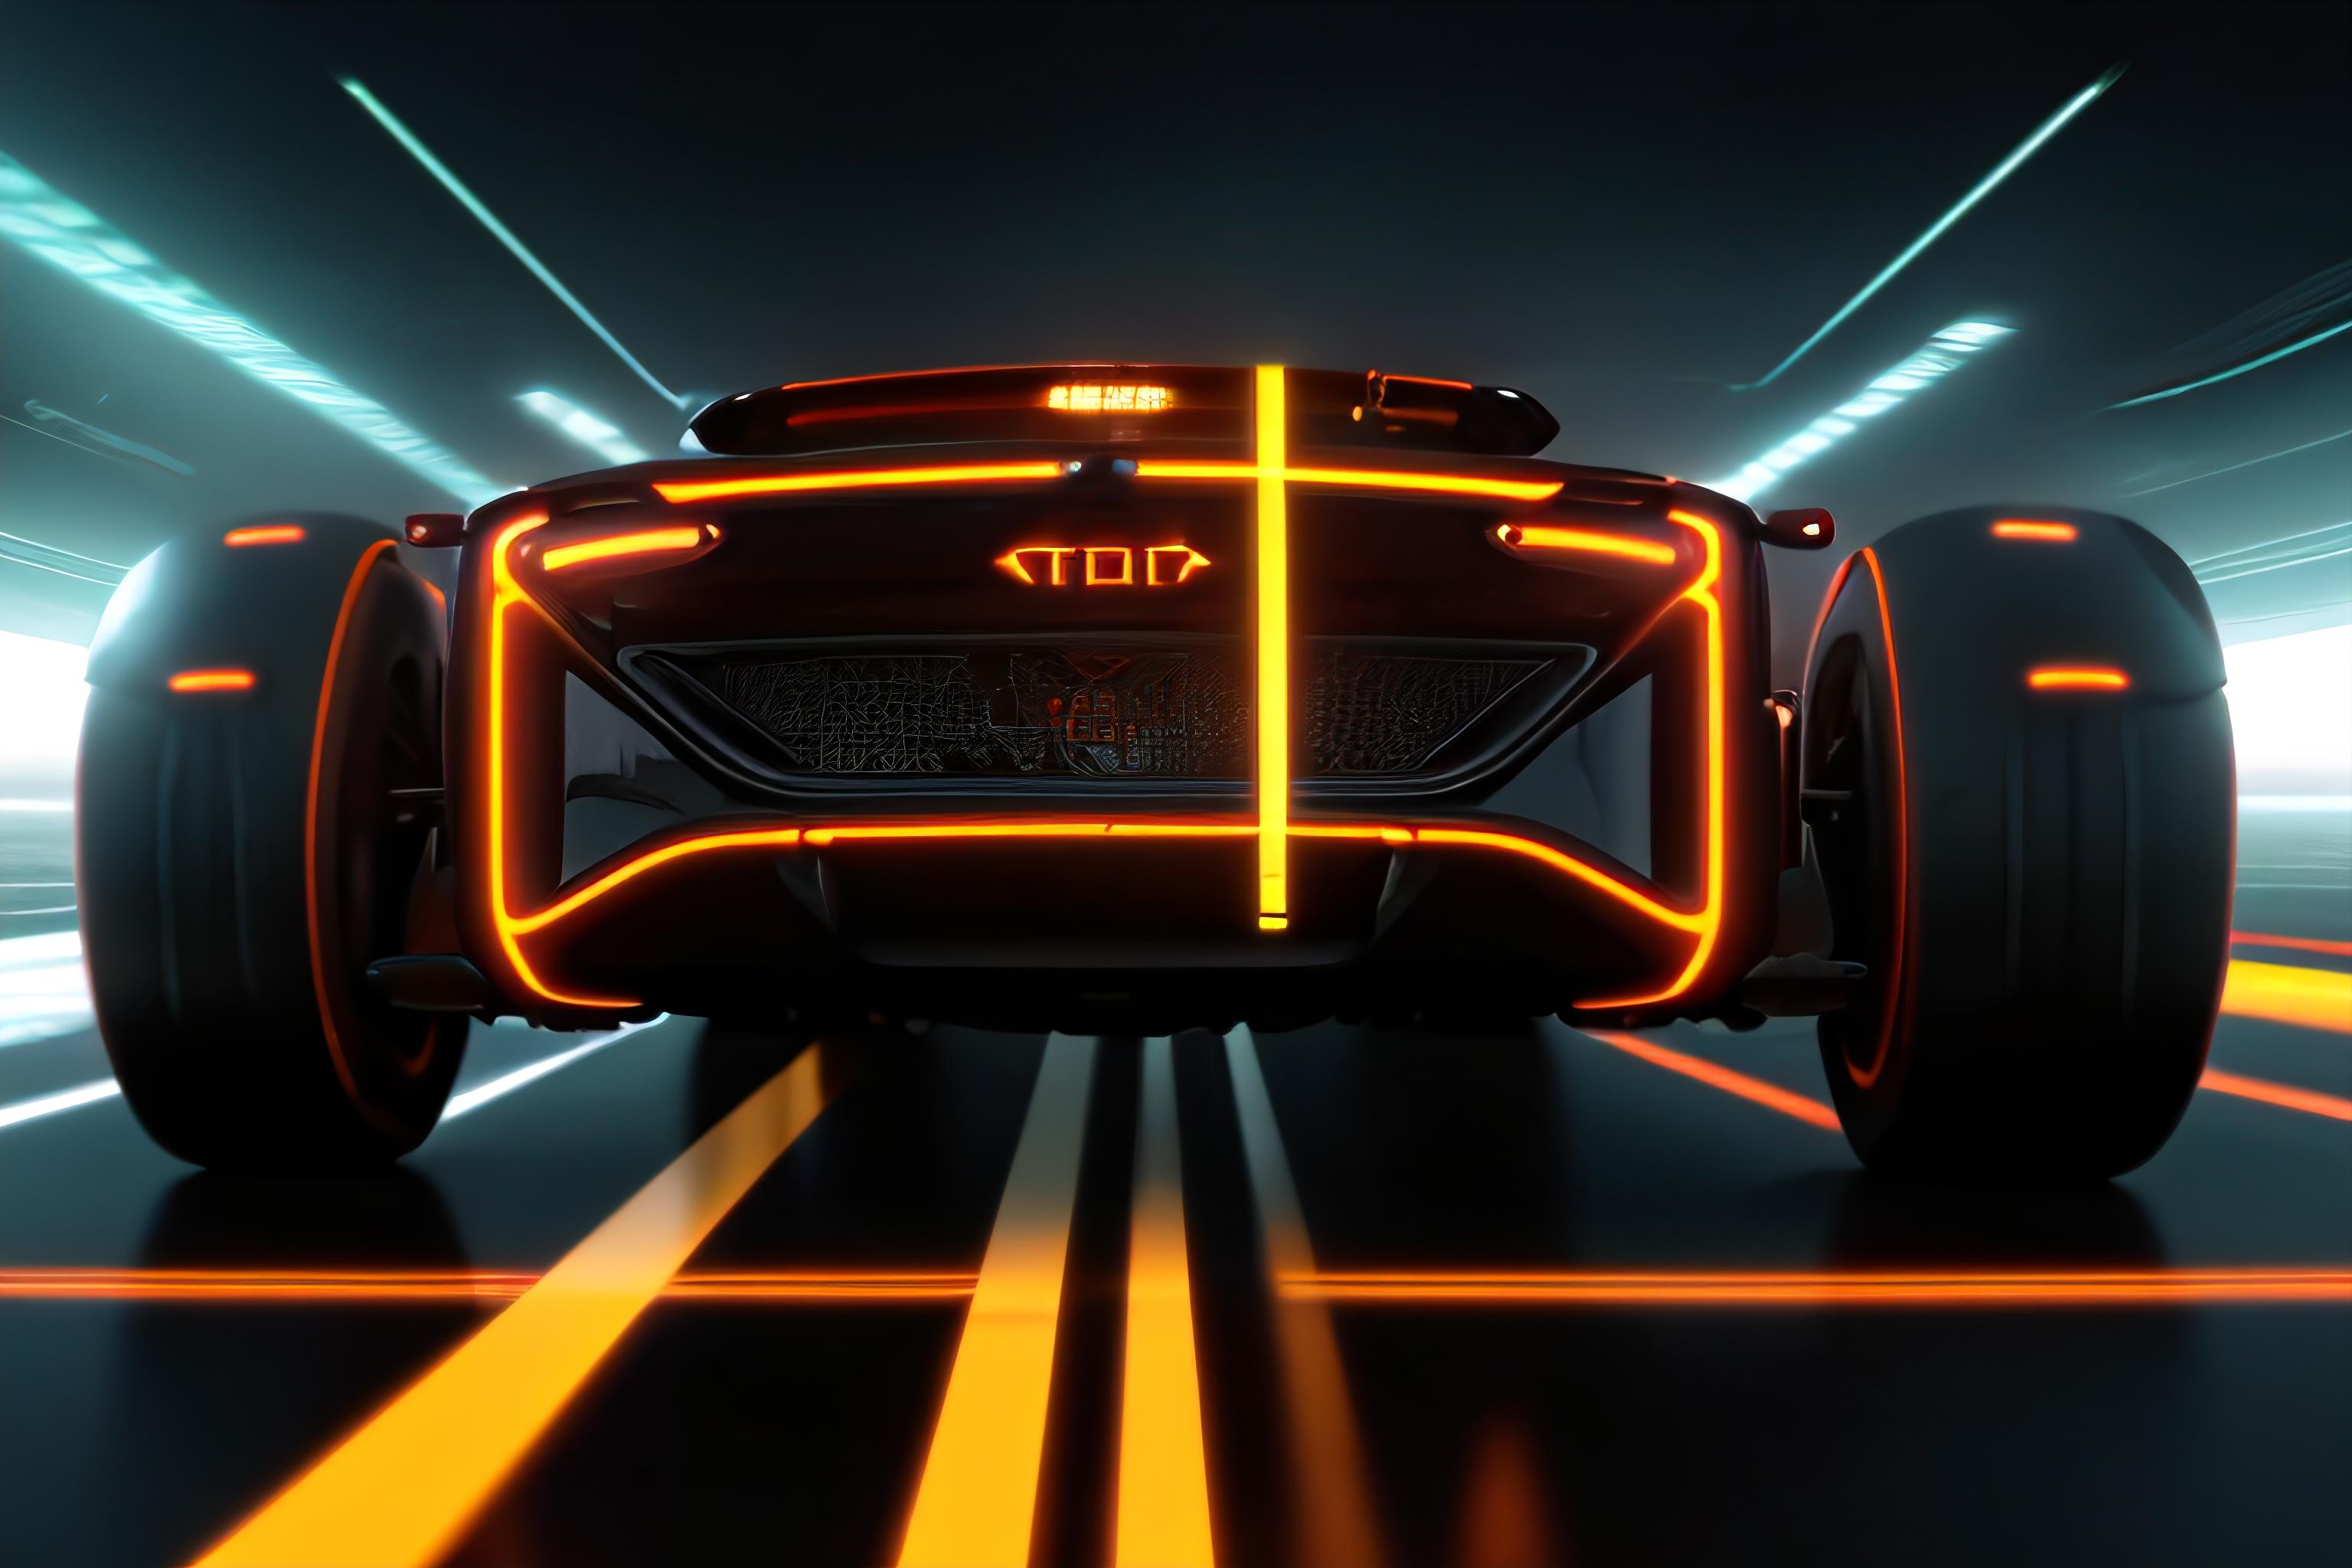 Tron Legacy Style image by __2_